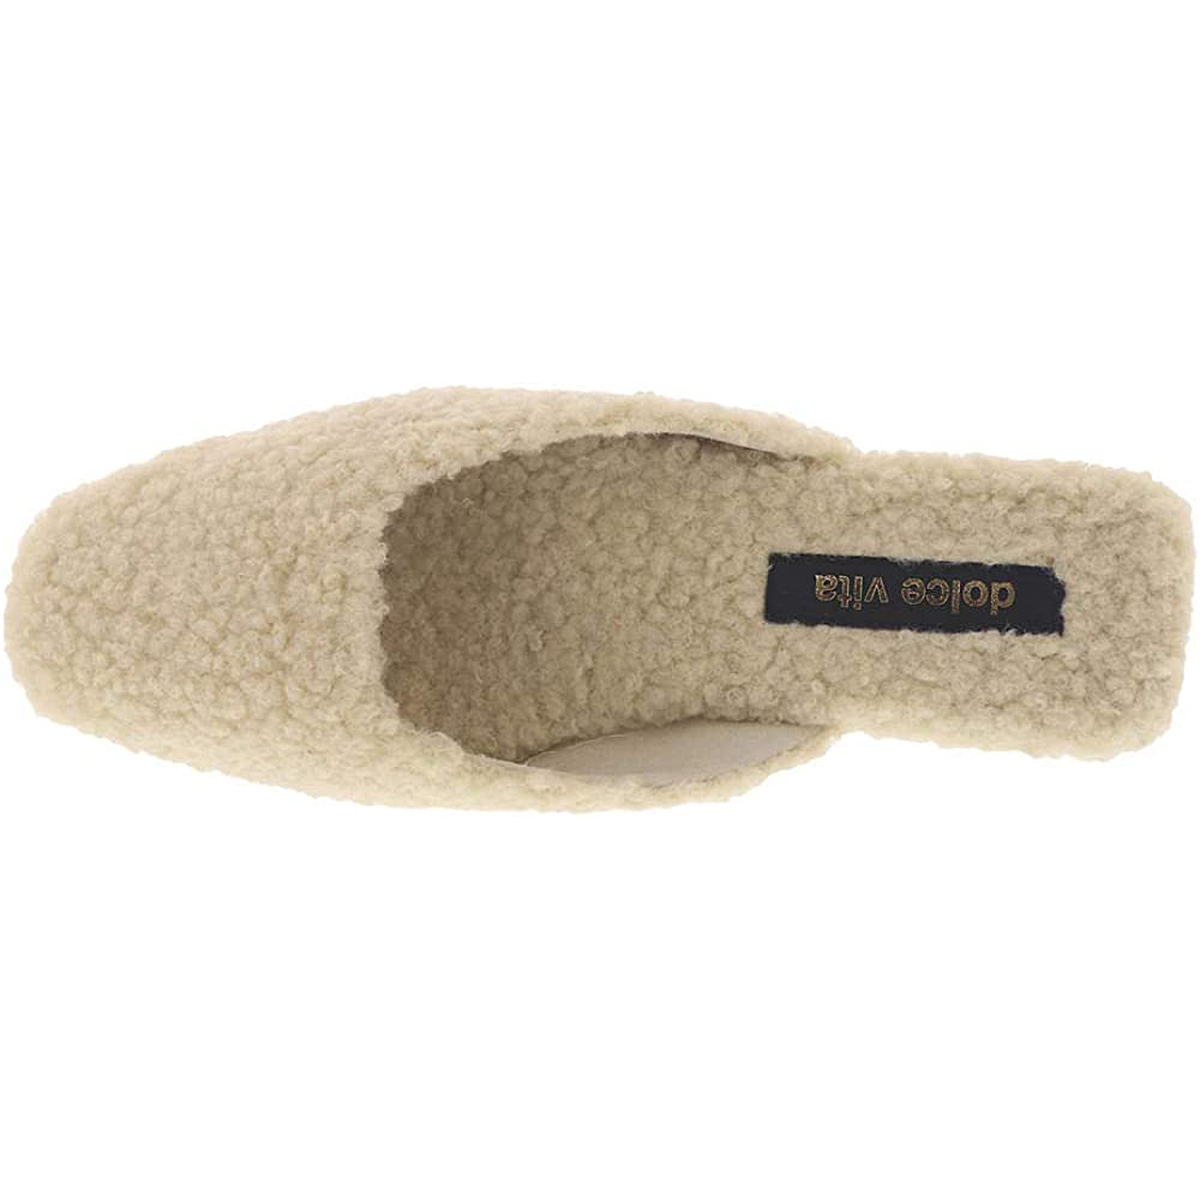 Kris Jenner Favorite Cozy Slippers Are Up to 58% Off: ‘So Chic’